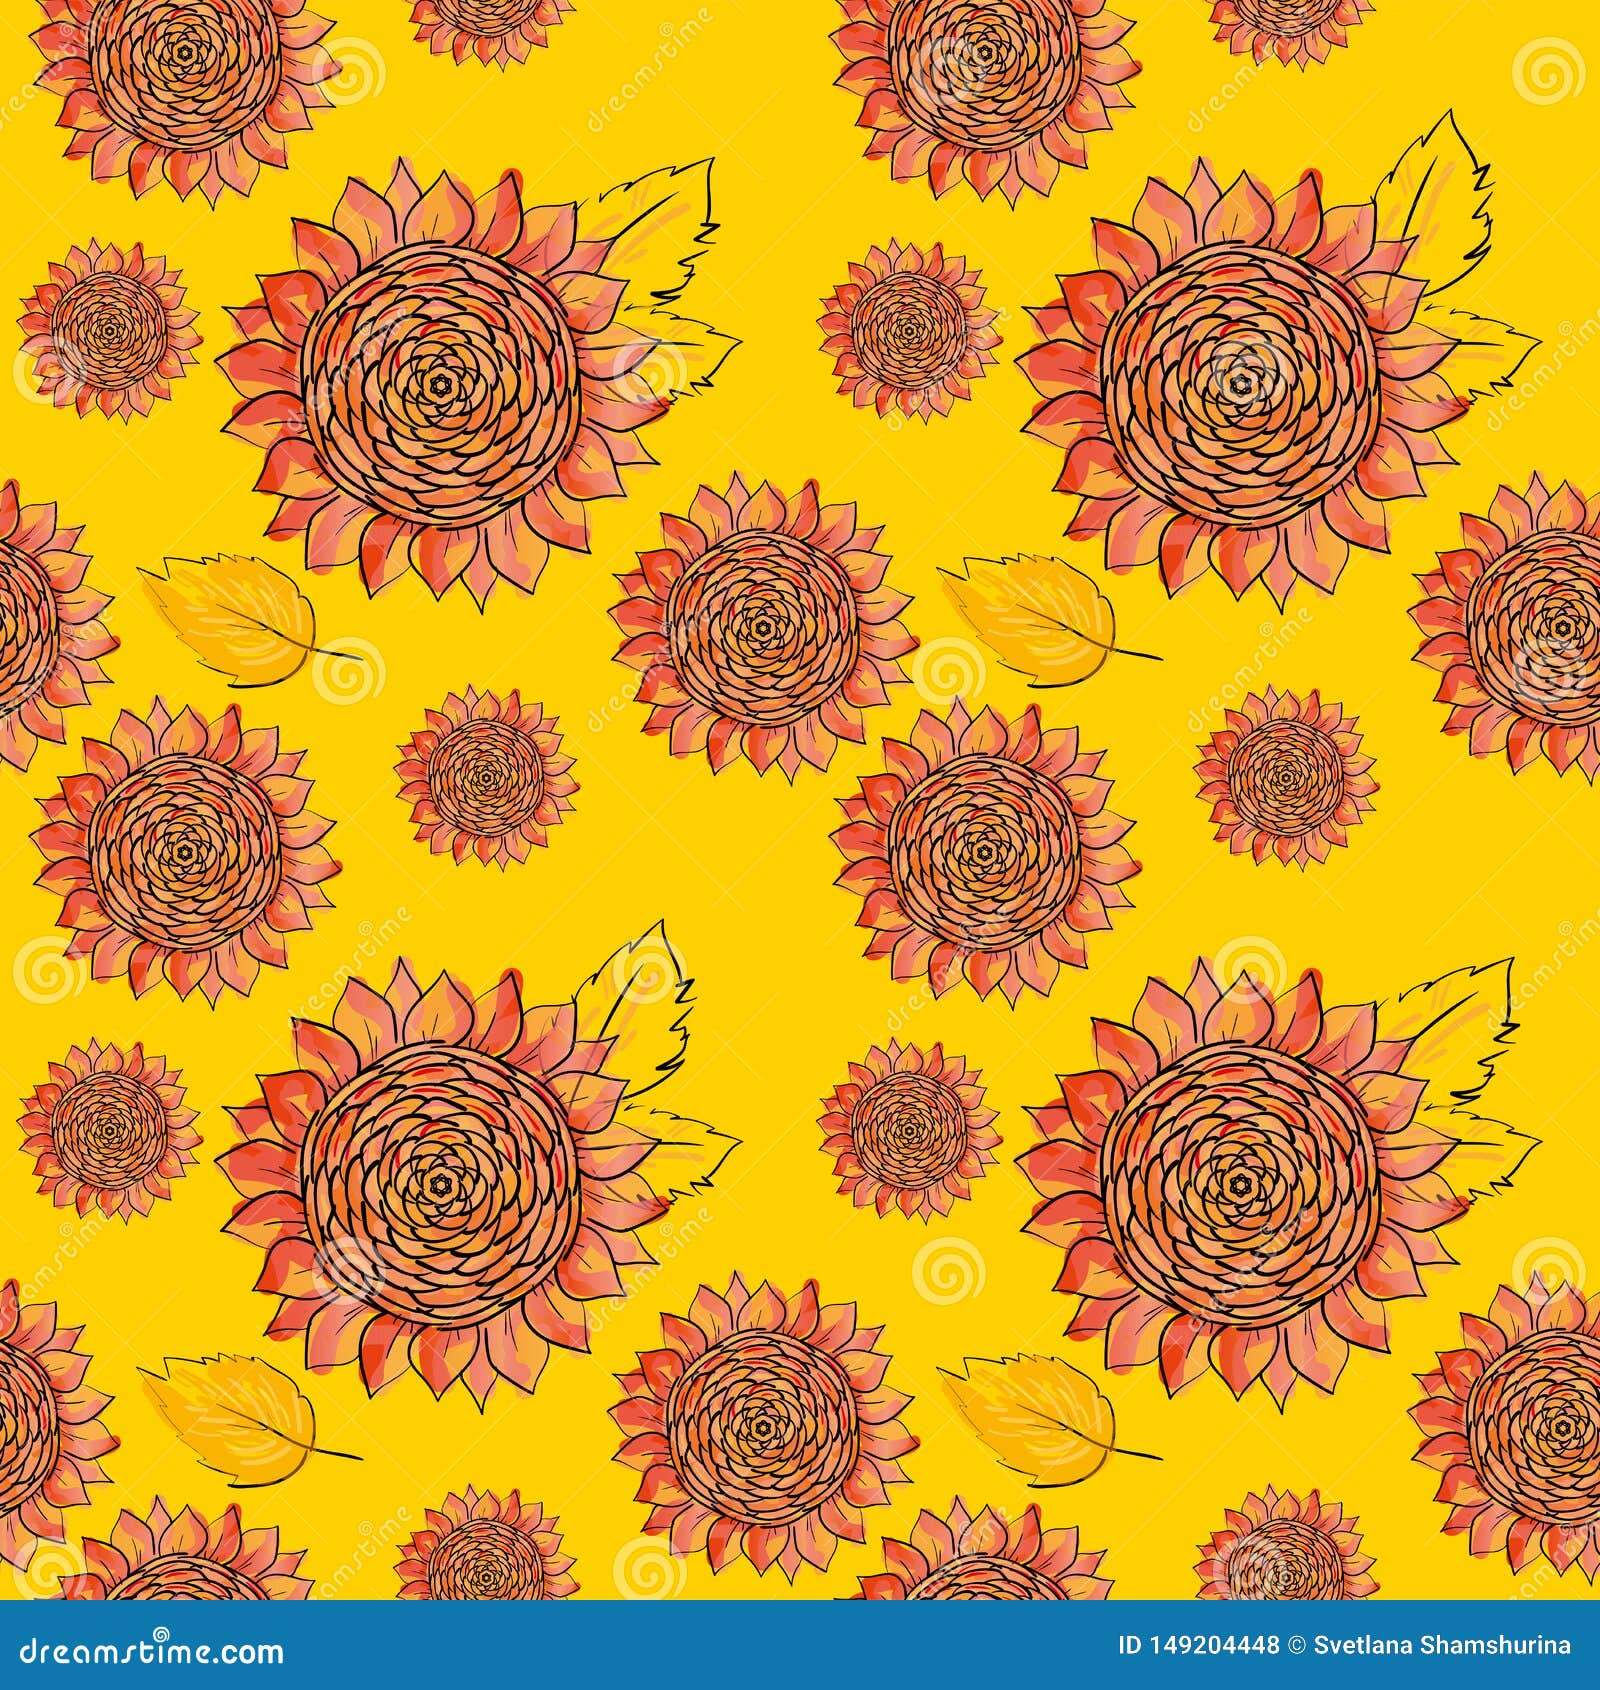 Download Red Sunflower Vector Seamless Pattern With Leaves ...